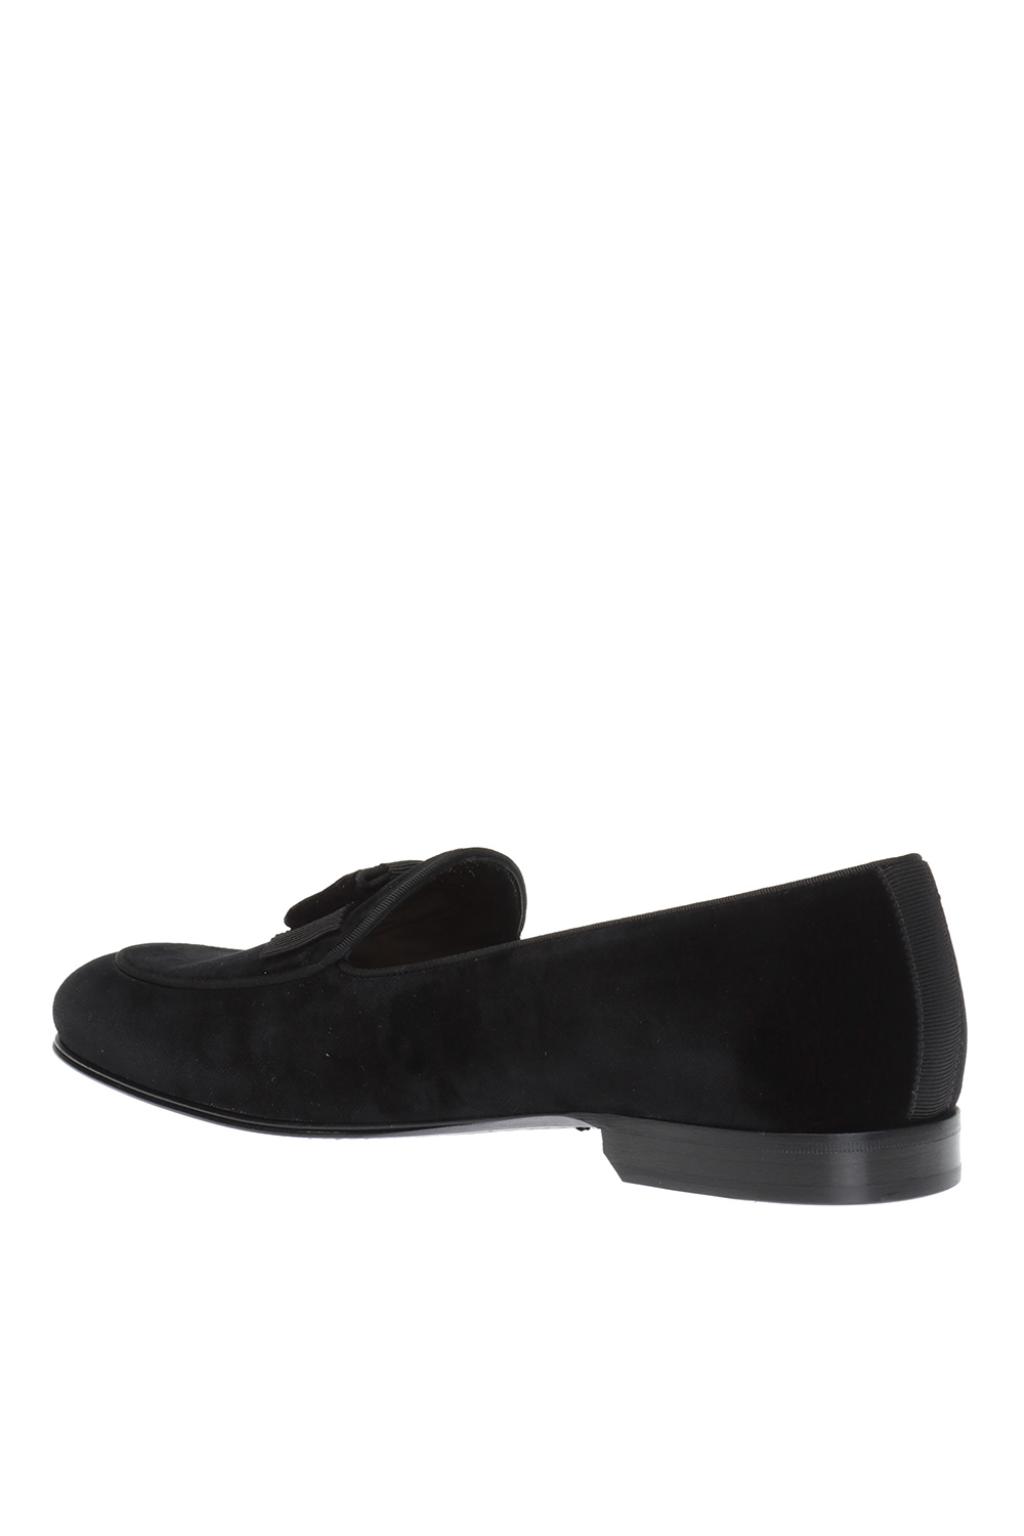 Dolce & Gabbana Loafers with a bow